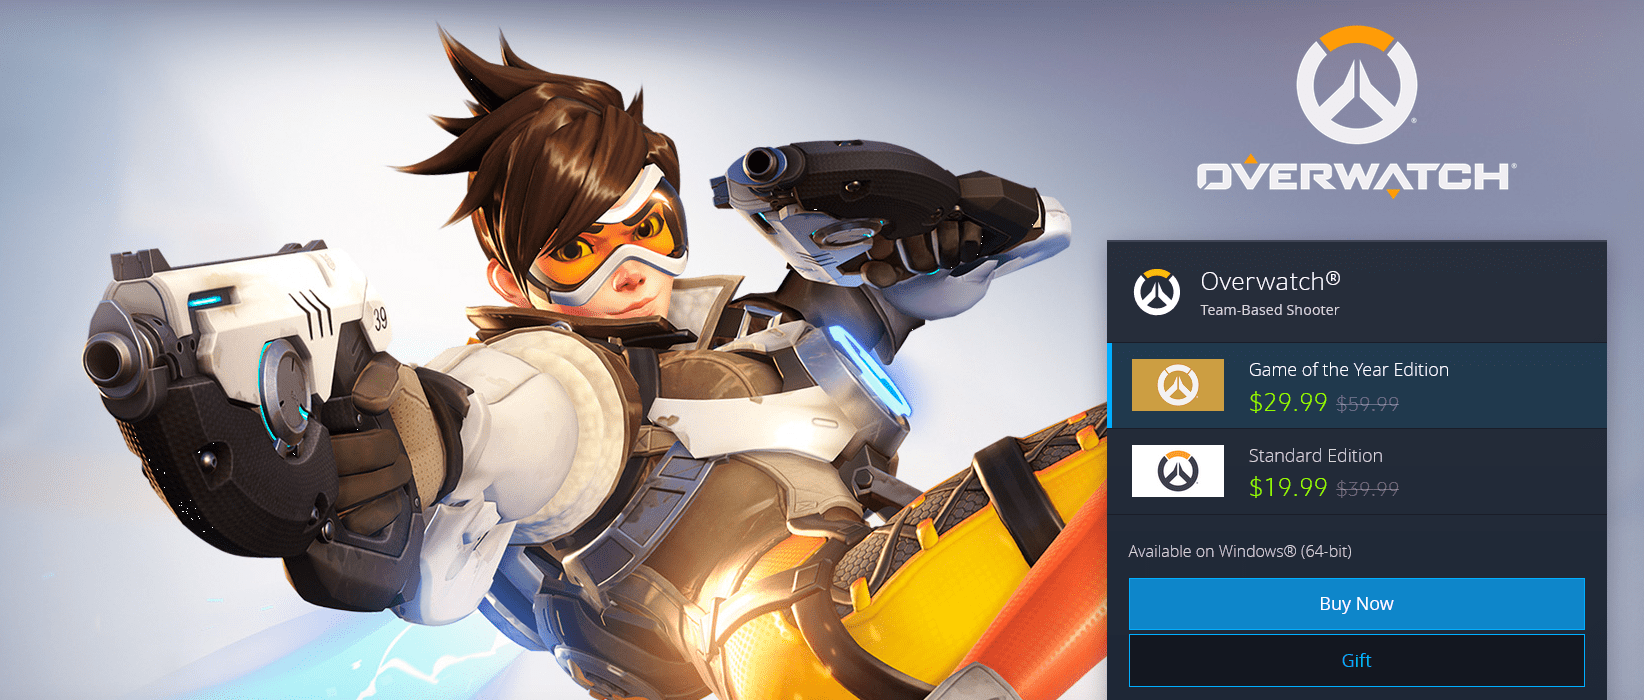 Overwatch is Half-Price for the Holiday Season